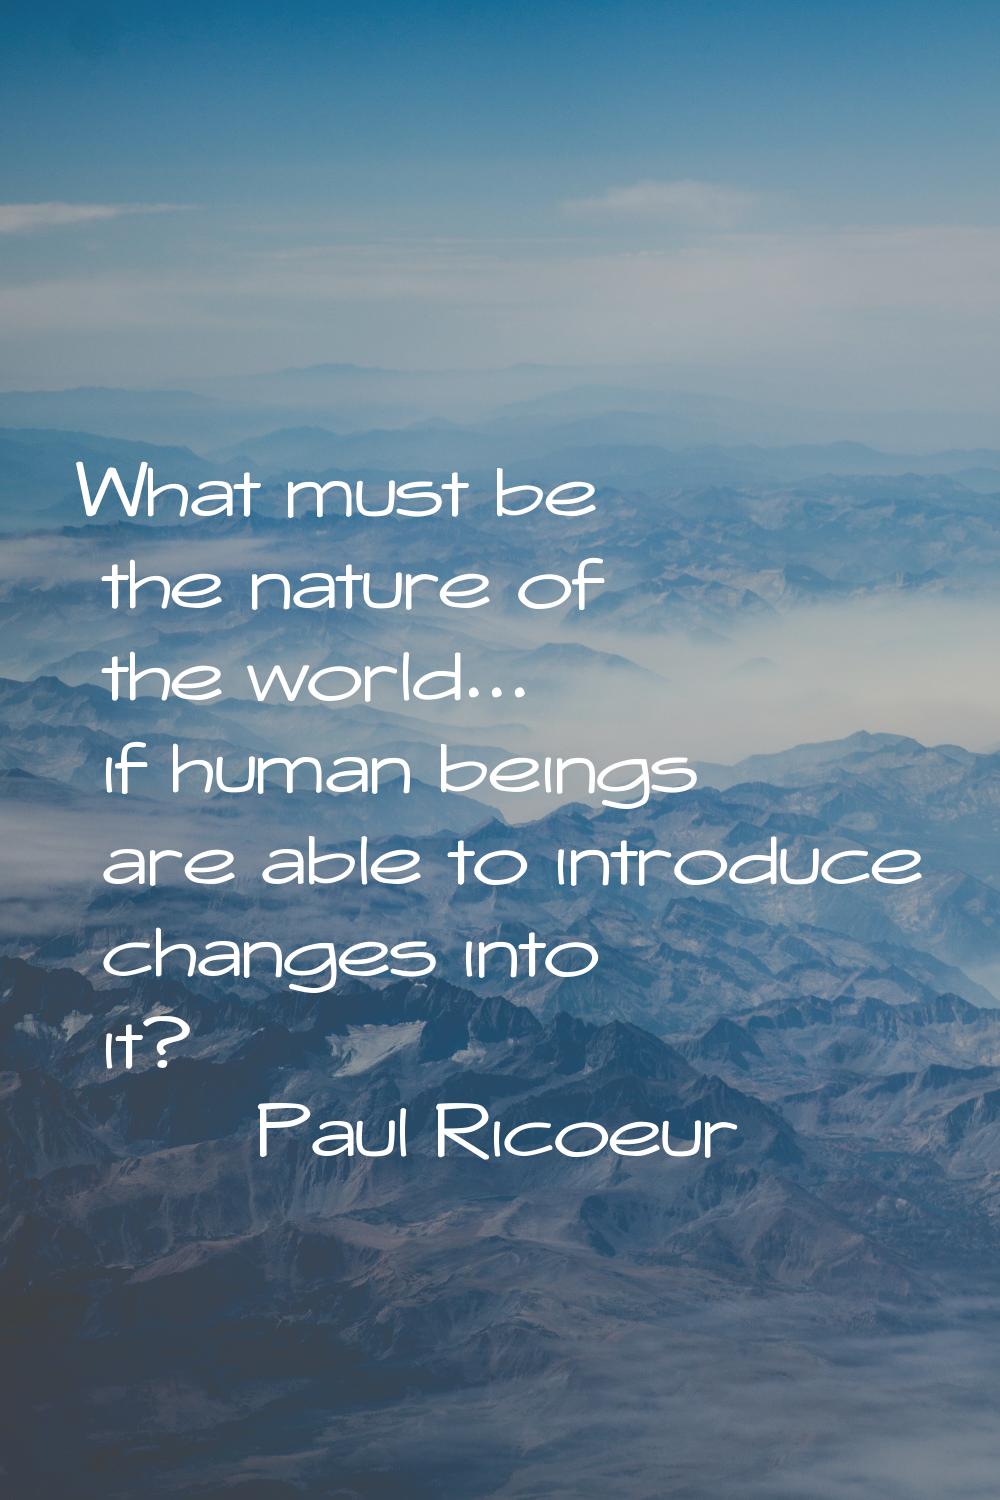 What must be the nature of the world... if human beings are able to introduce changes into it?